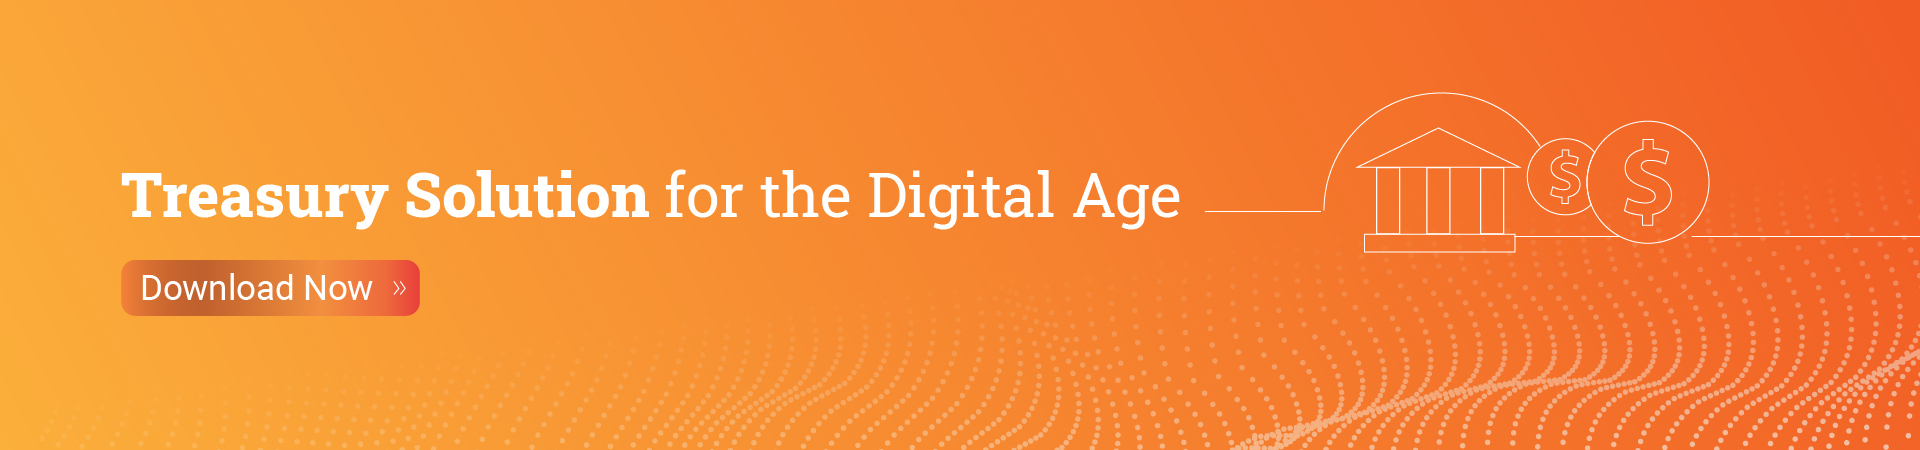 Treasury Solutions for the Digital Age